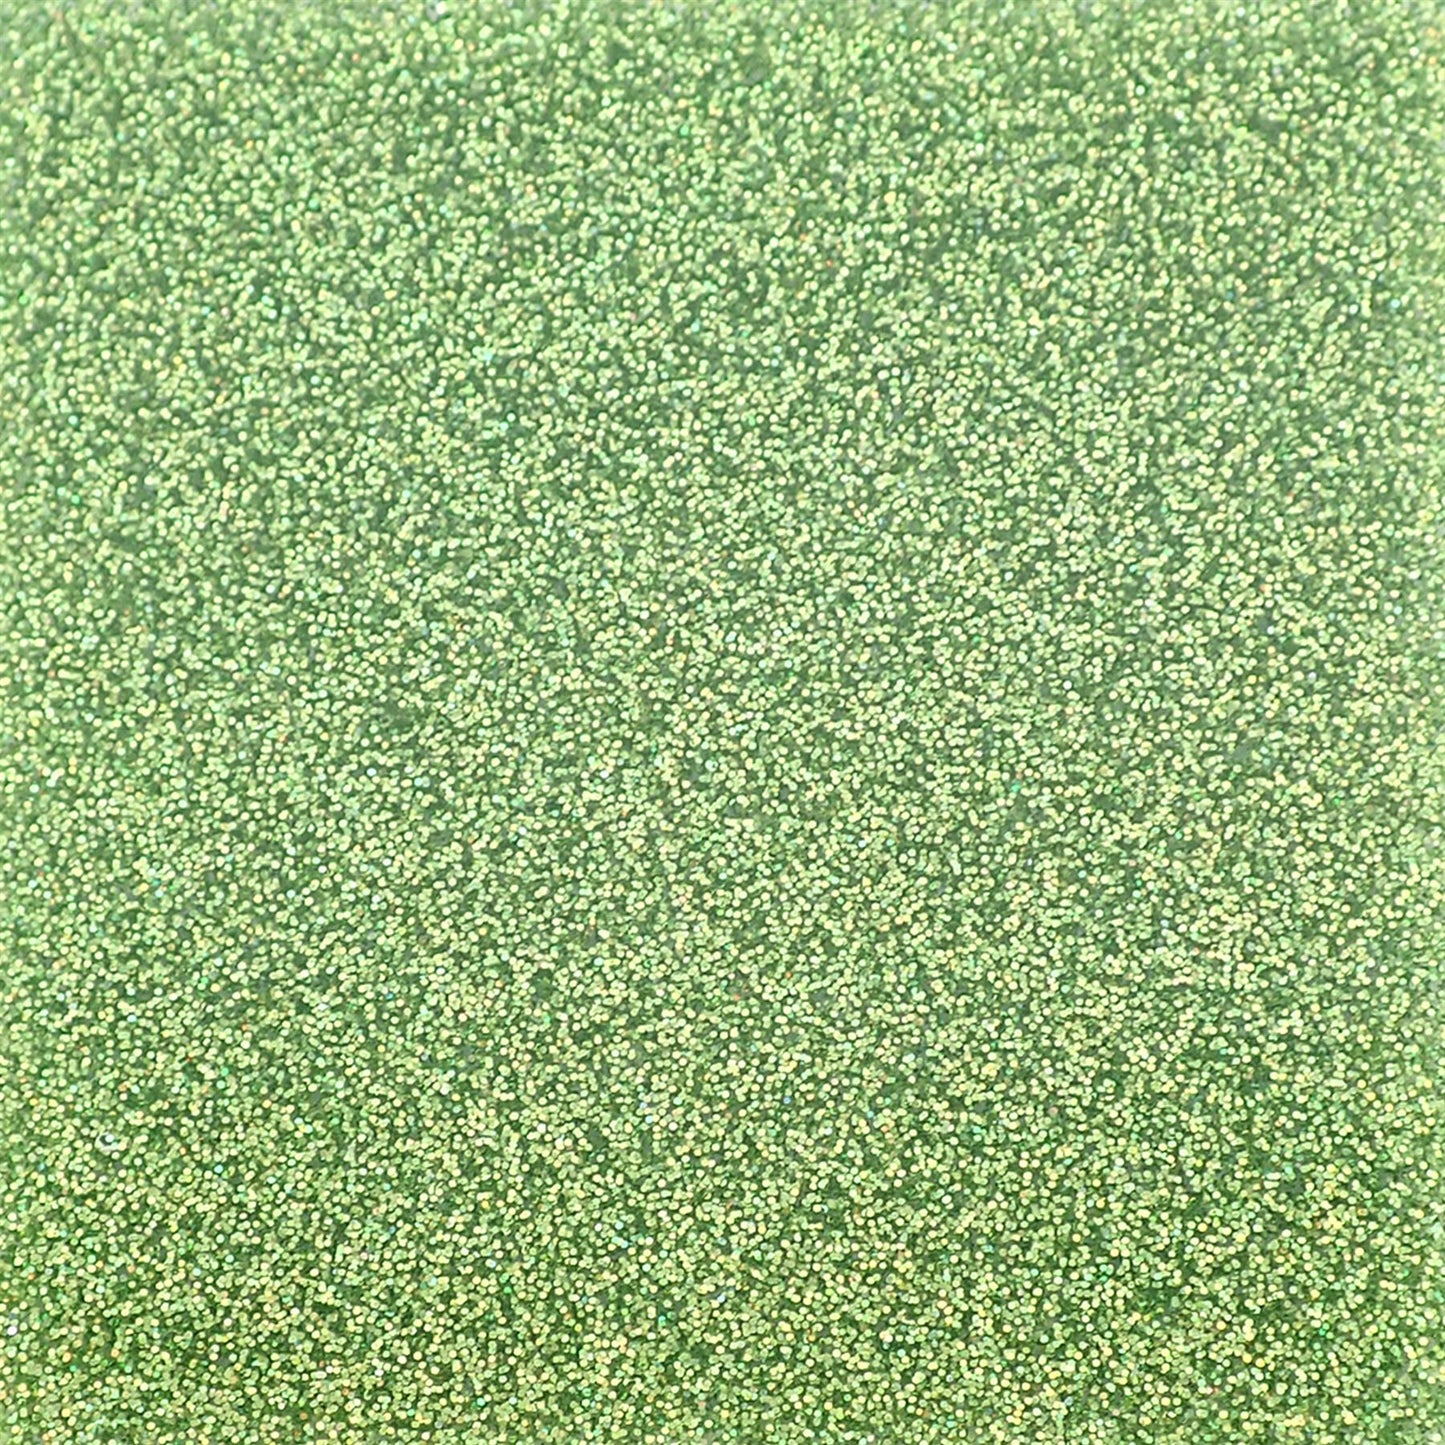 Incudo Apple Green 2-Sided Holographic Glitter Acrylic Sheet - 98x98x3mm (3.9x3.86x0.12"), Sample